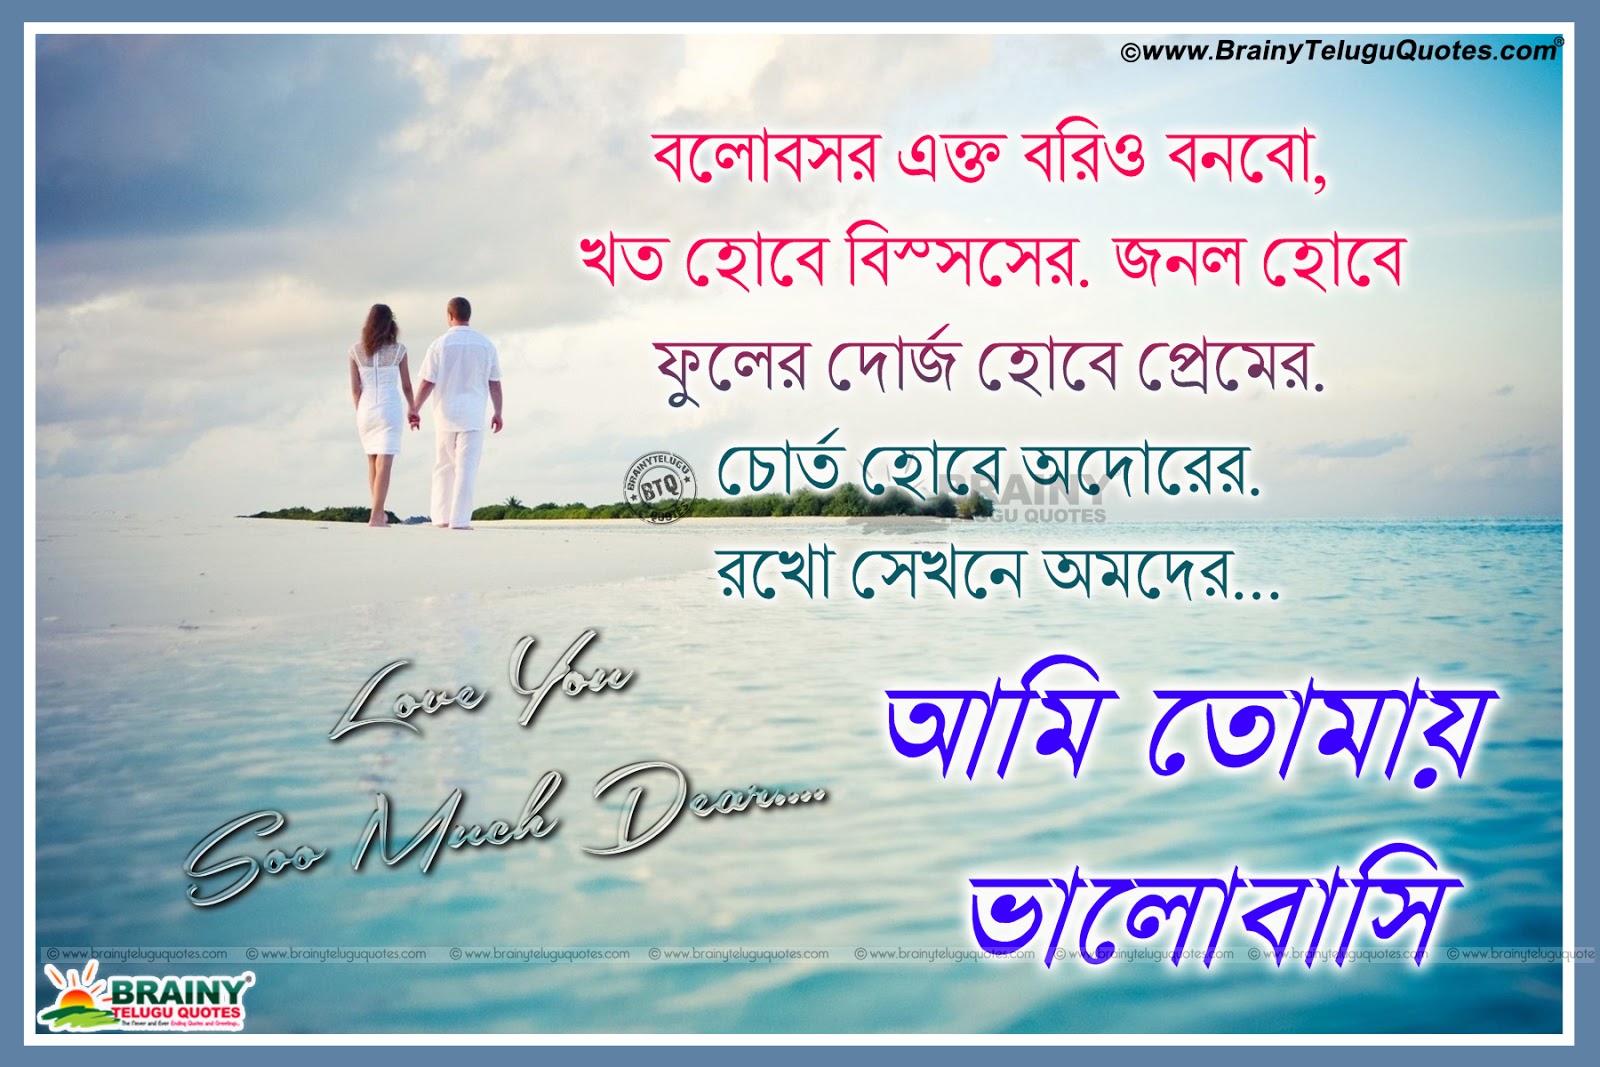 Bangla Sad Love Poem Picture Heart touching bengali love feelings quotes images